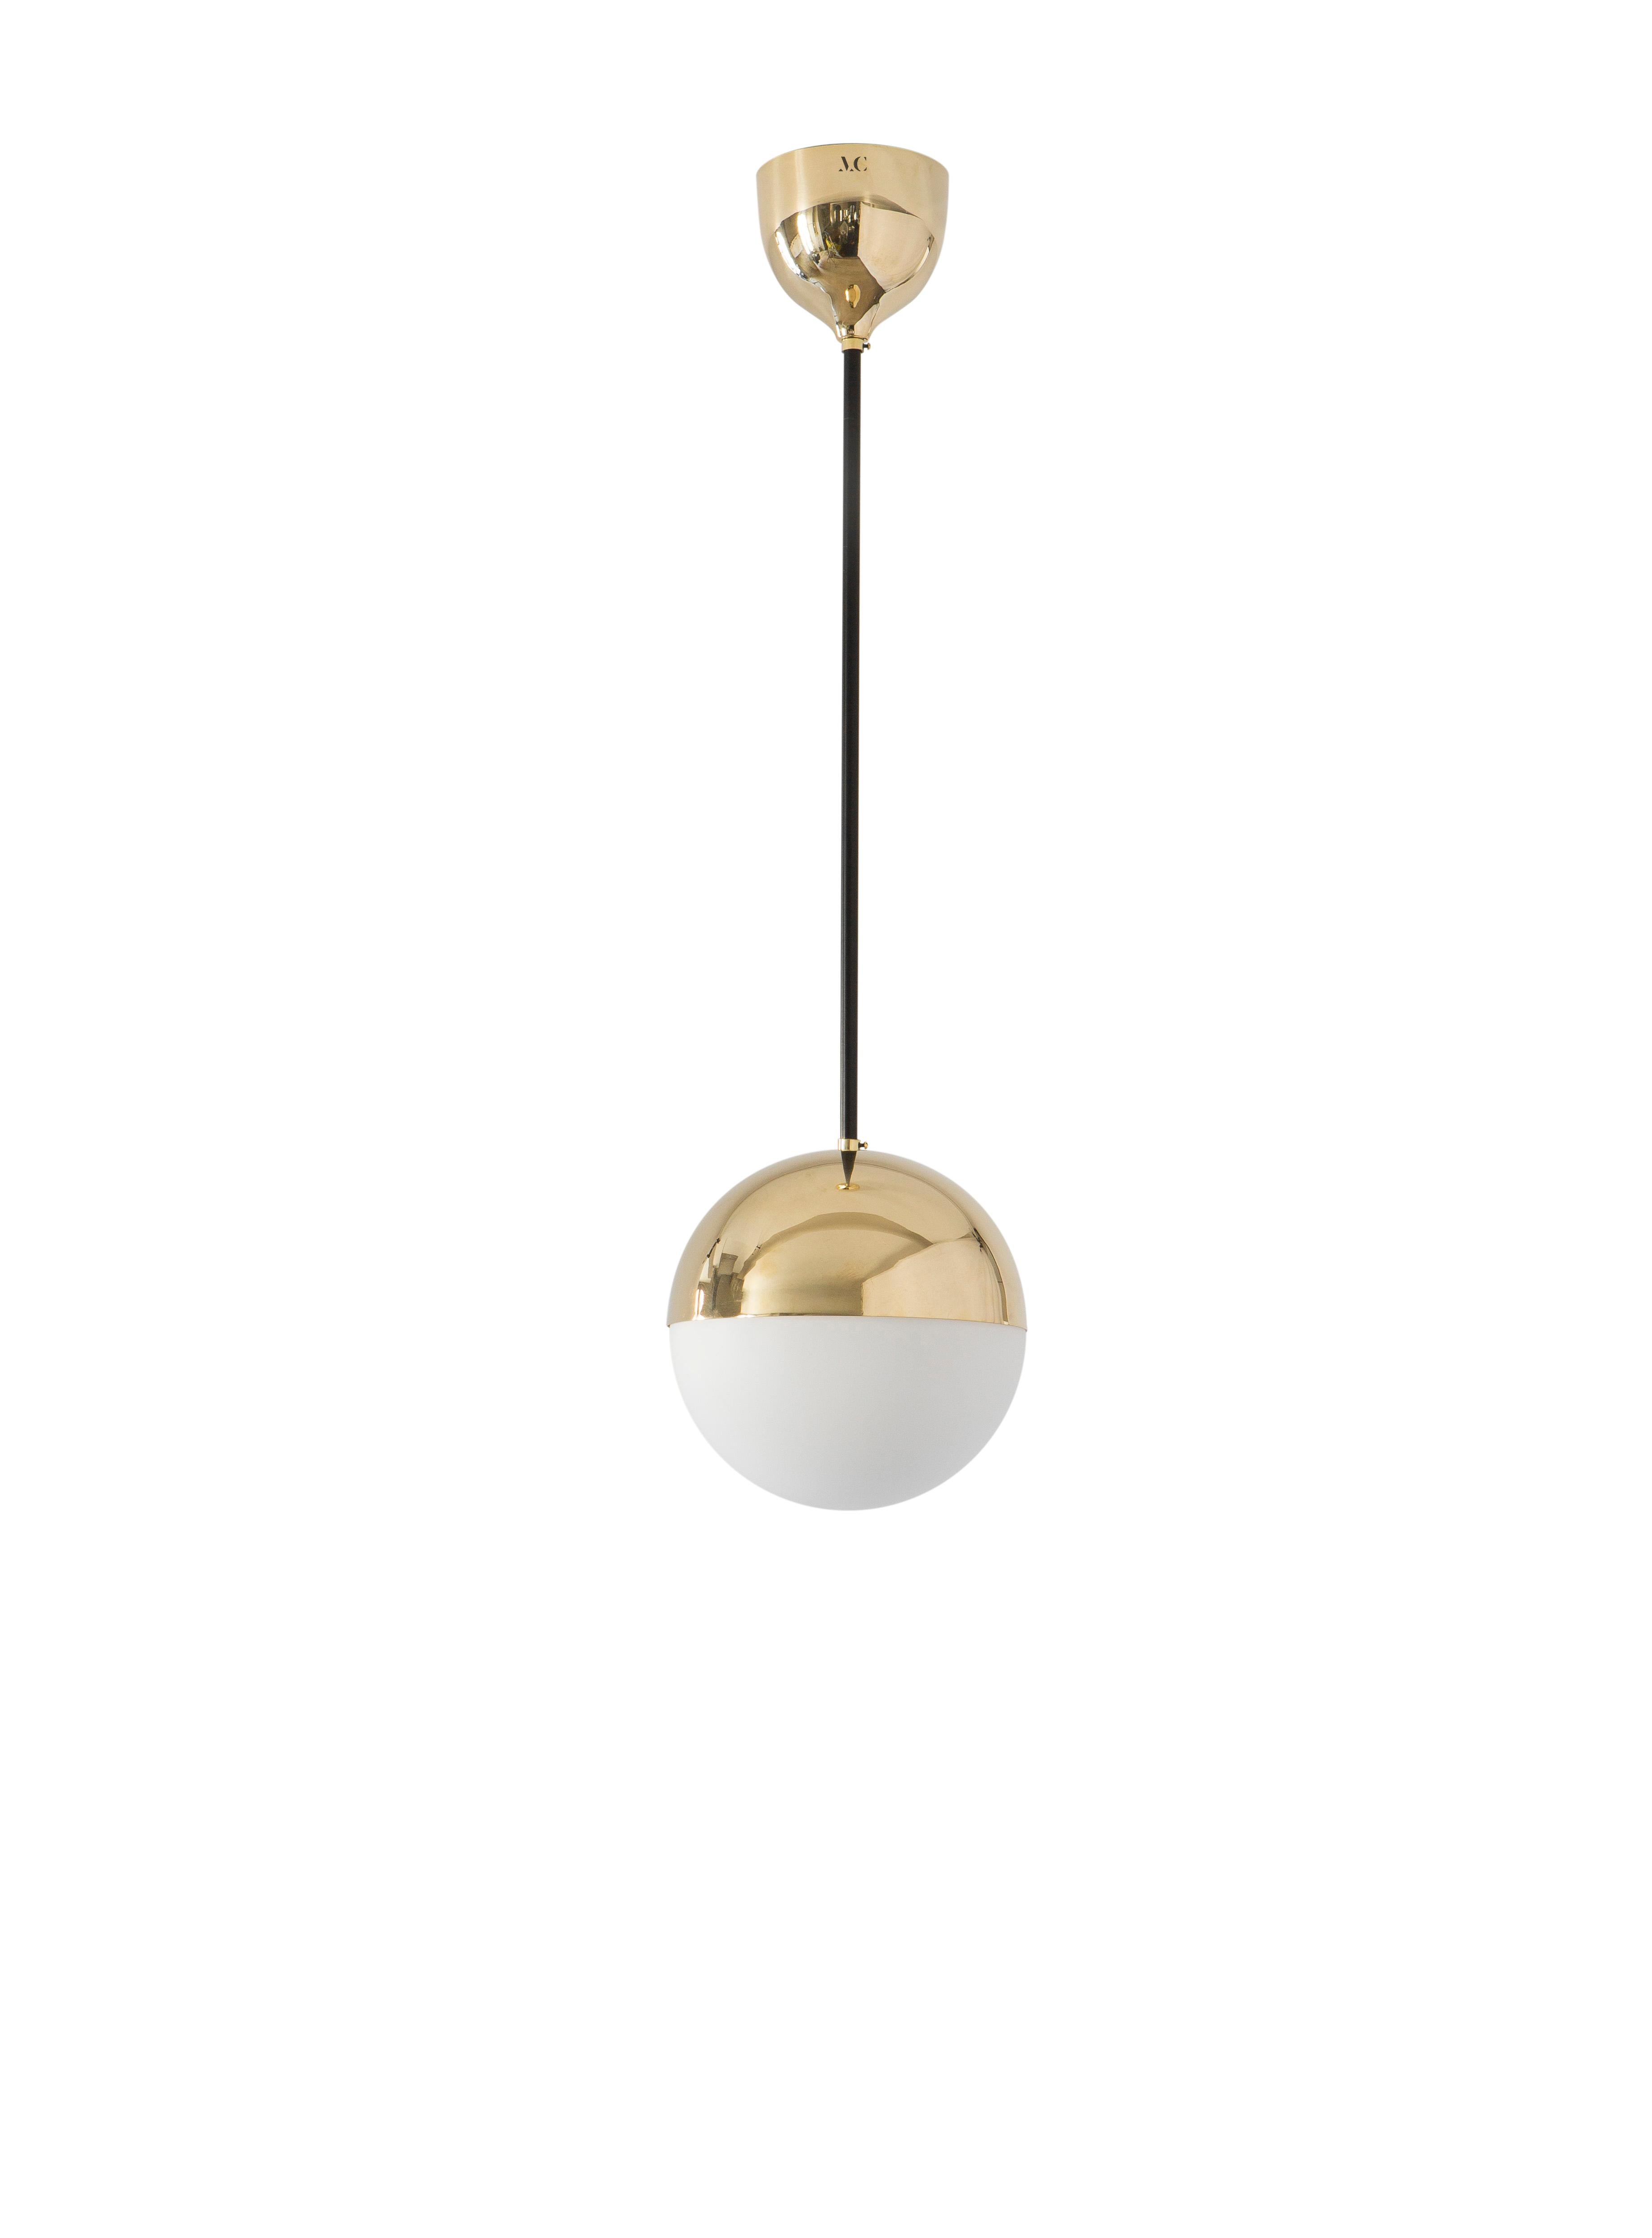 Pendant 01 by Magic Circus Editions
Dimensions: D 25 x W 25 x H 90 cm, also available in H 110, 130, 150, 175, 190 cm
Materials: brass, mouth blown glass

All our lamps can be wired according to each country. If sold to the USA it will be wired